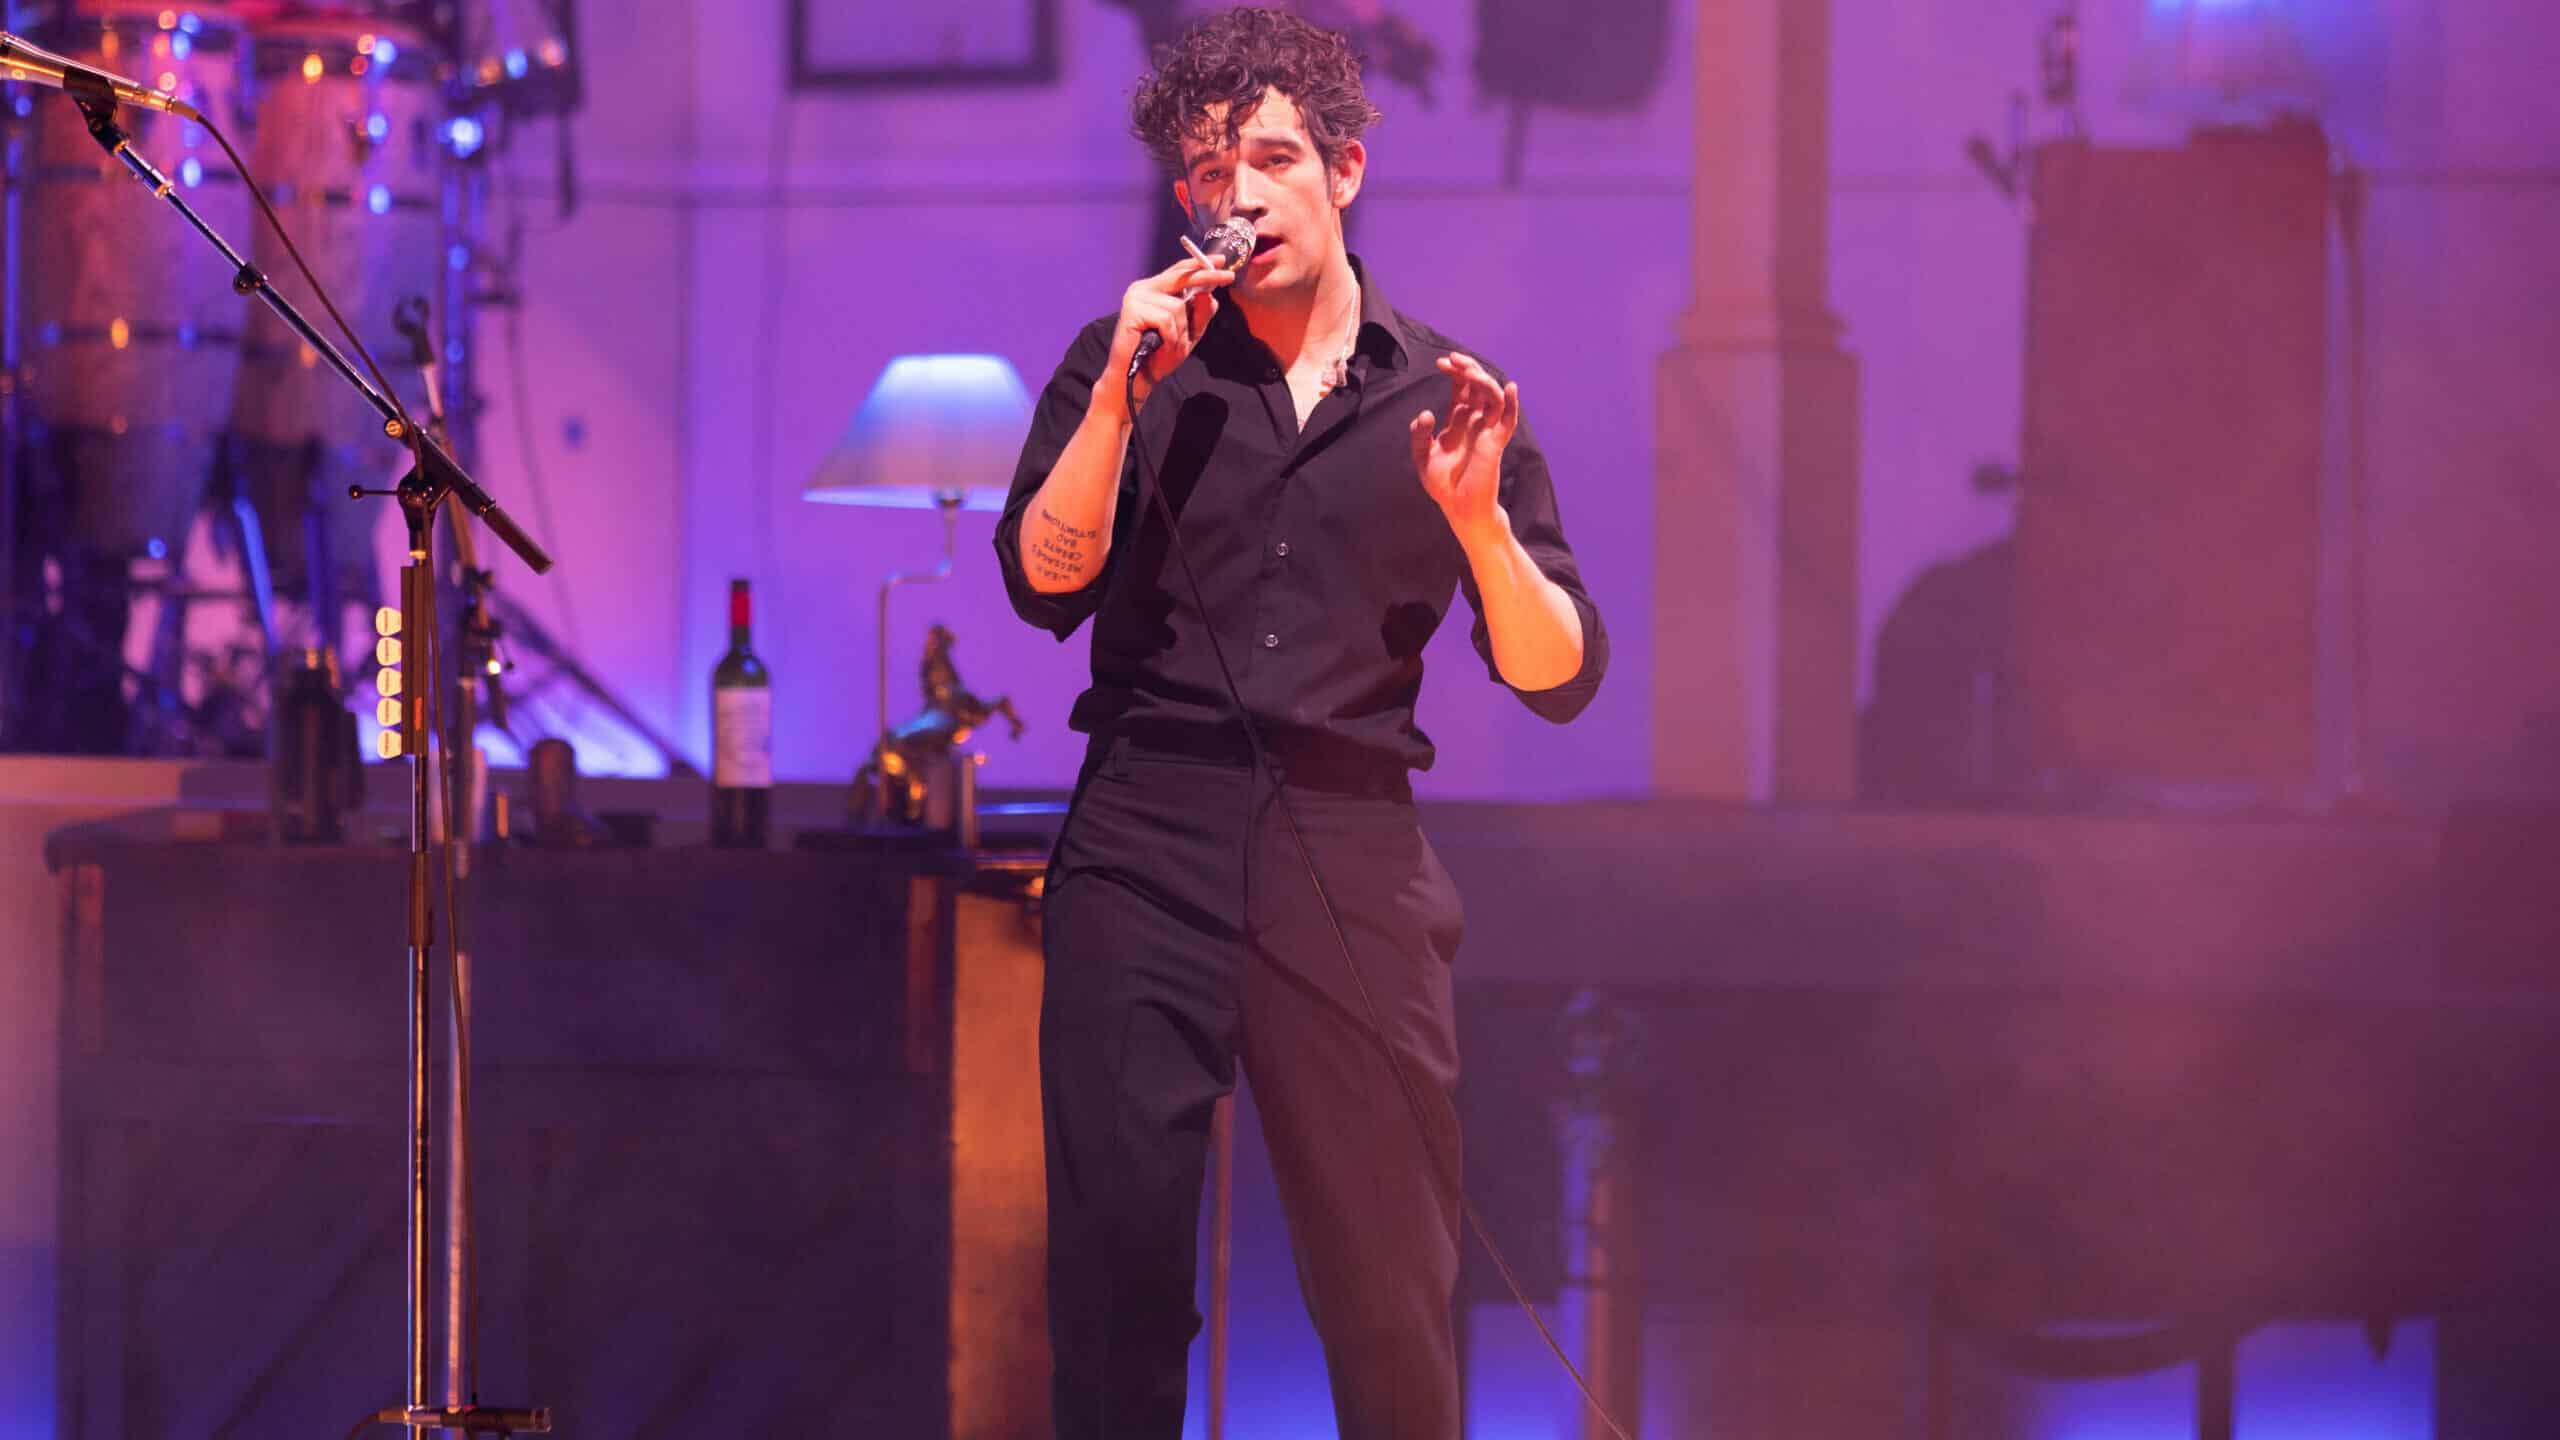 Matty Healy of The 1975 performs at The O2 Arena on January 13, 2023 in London, England.